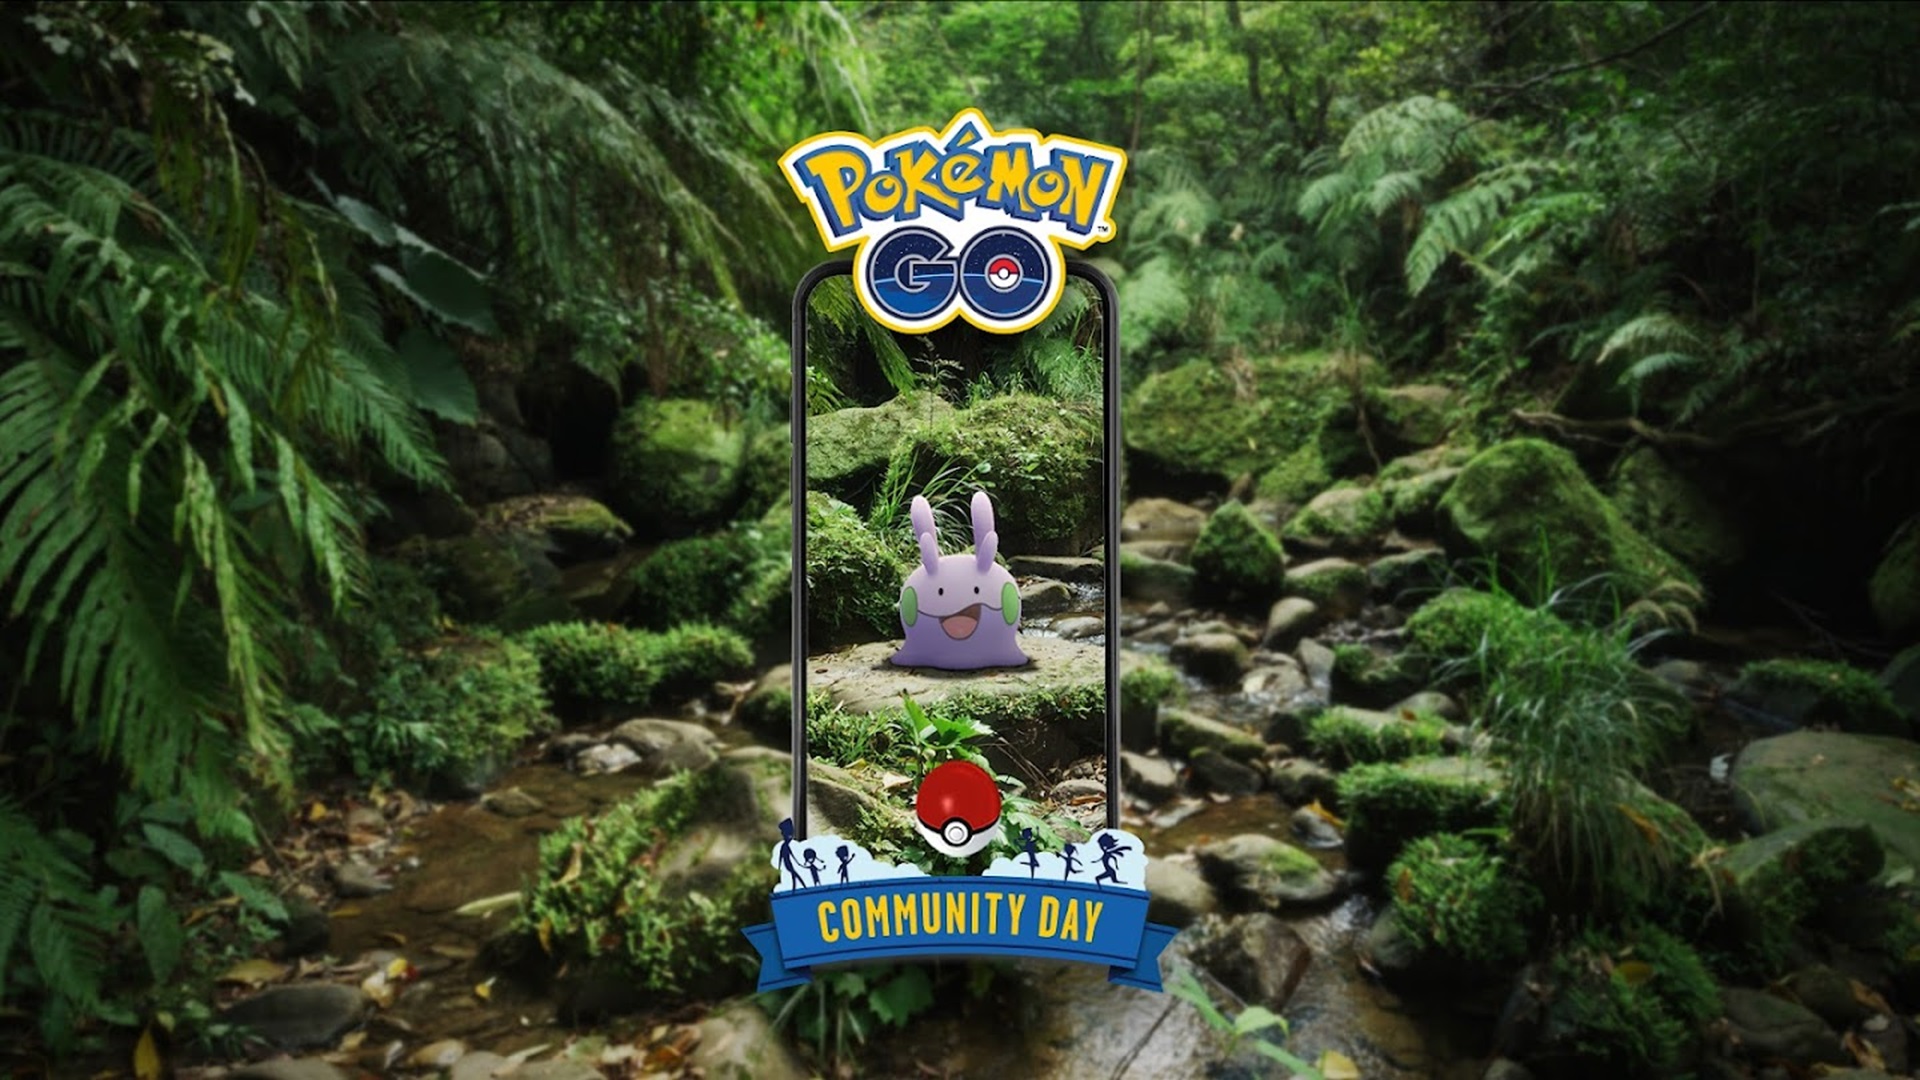 Pokemon Go Community day image featuring Goomy sitting in a forest